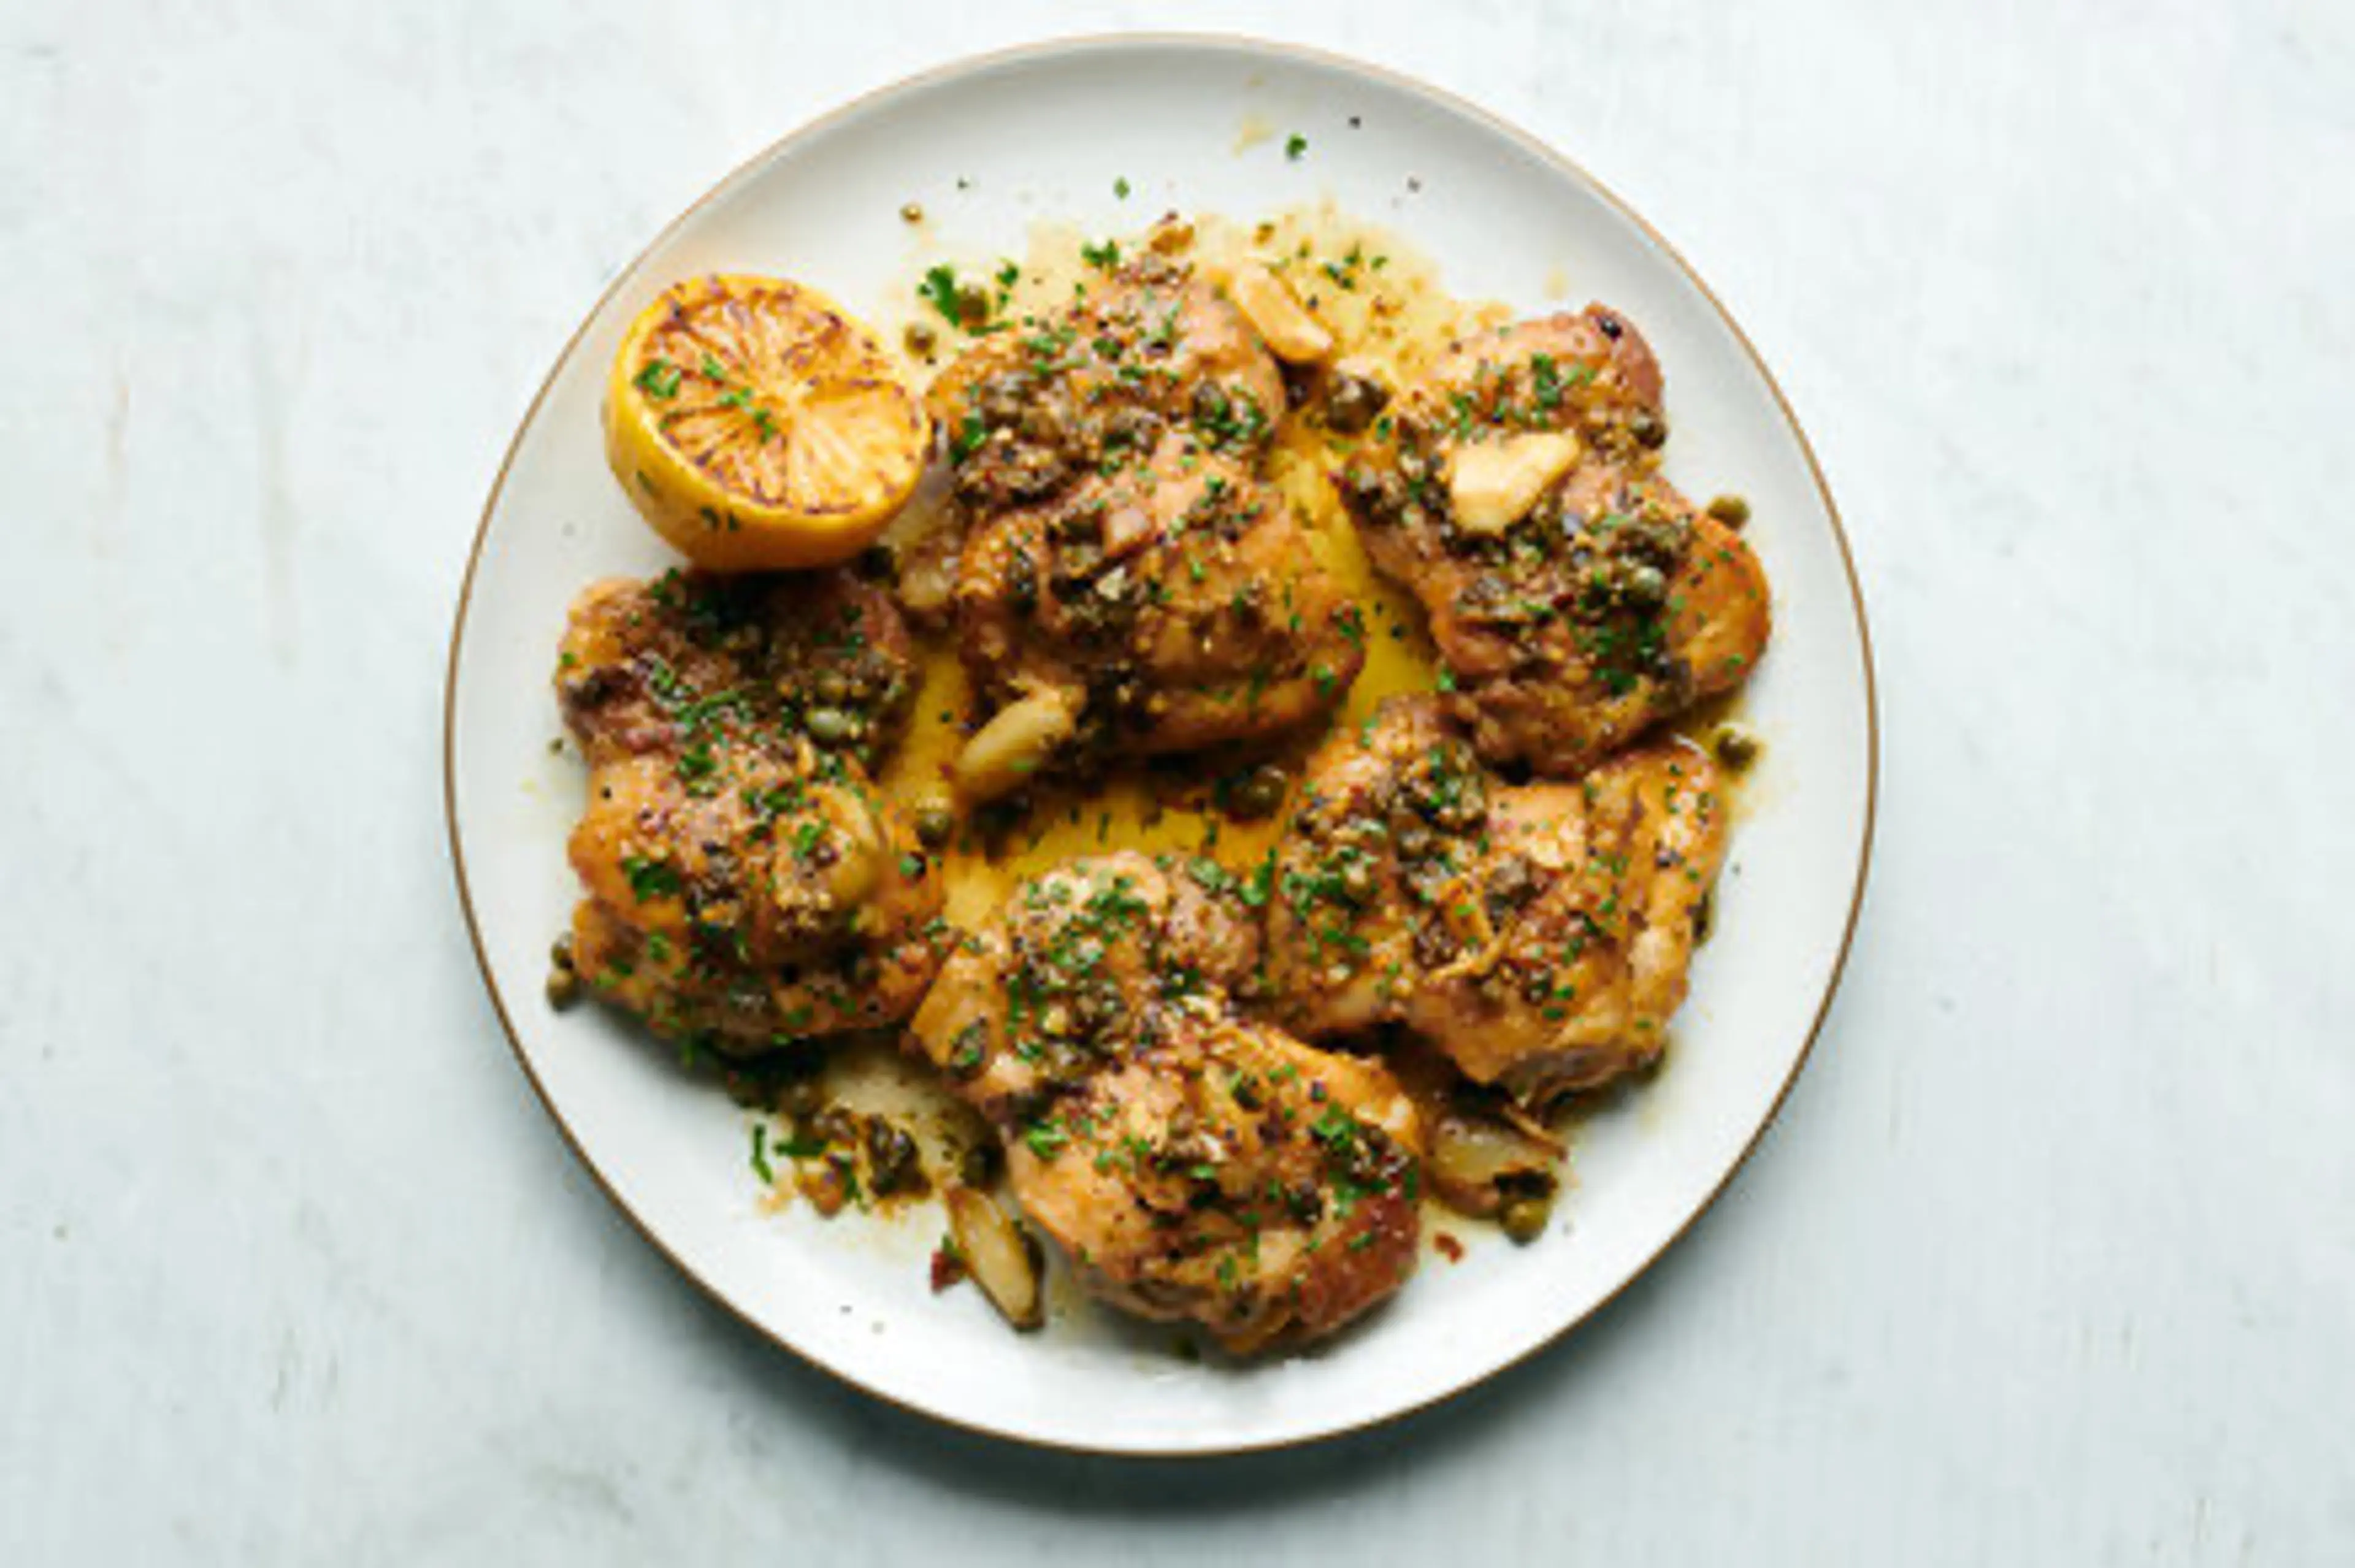 Garlicky Chicken With Lemon-Anchovy Sauce